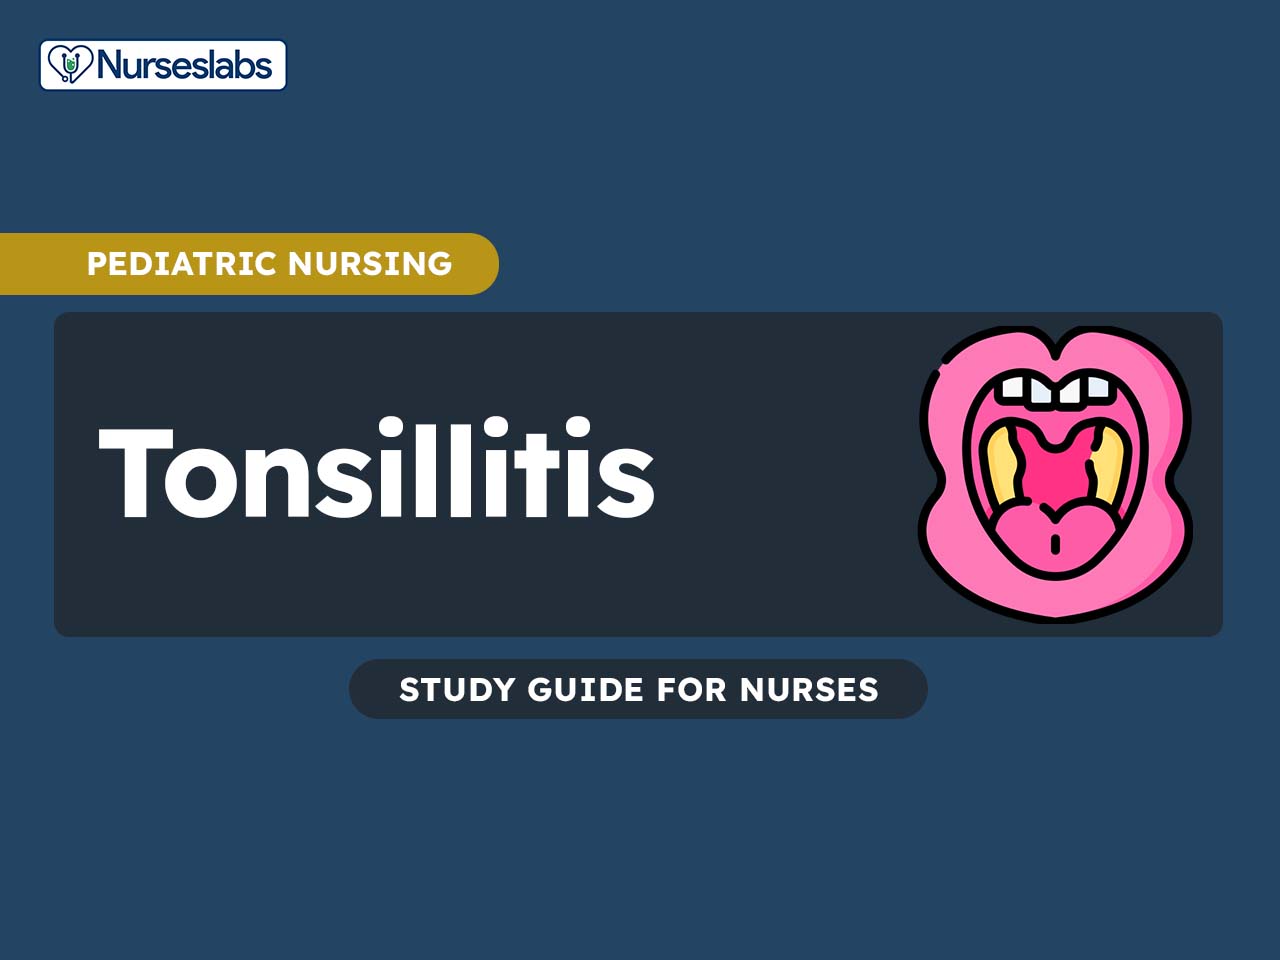 Tonsils: Anatomy, Definition & Function